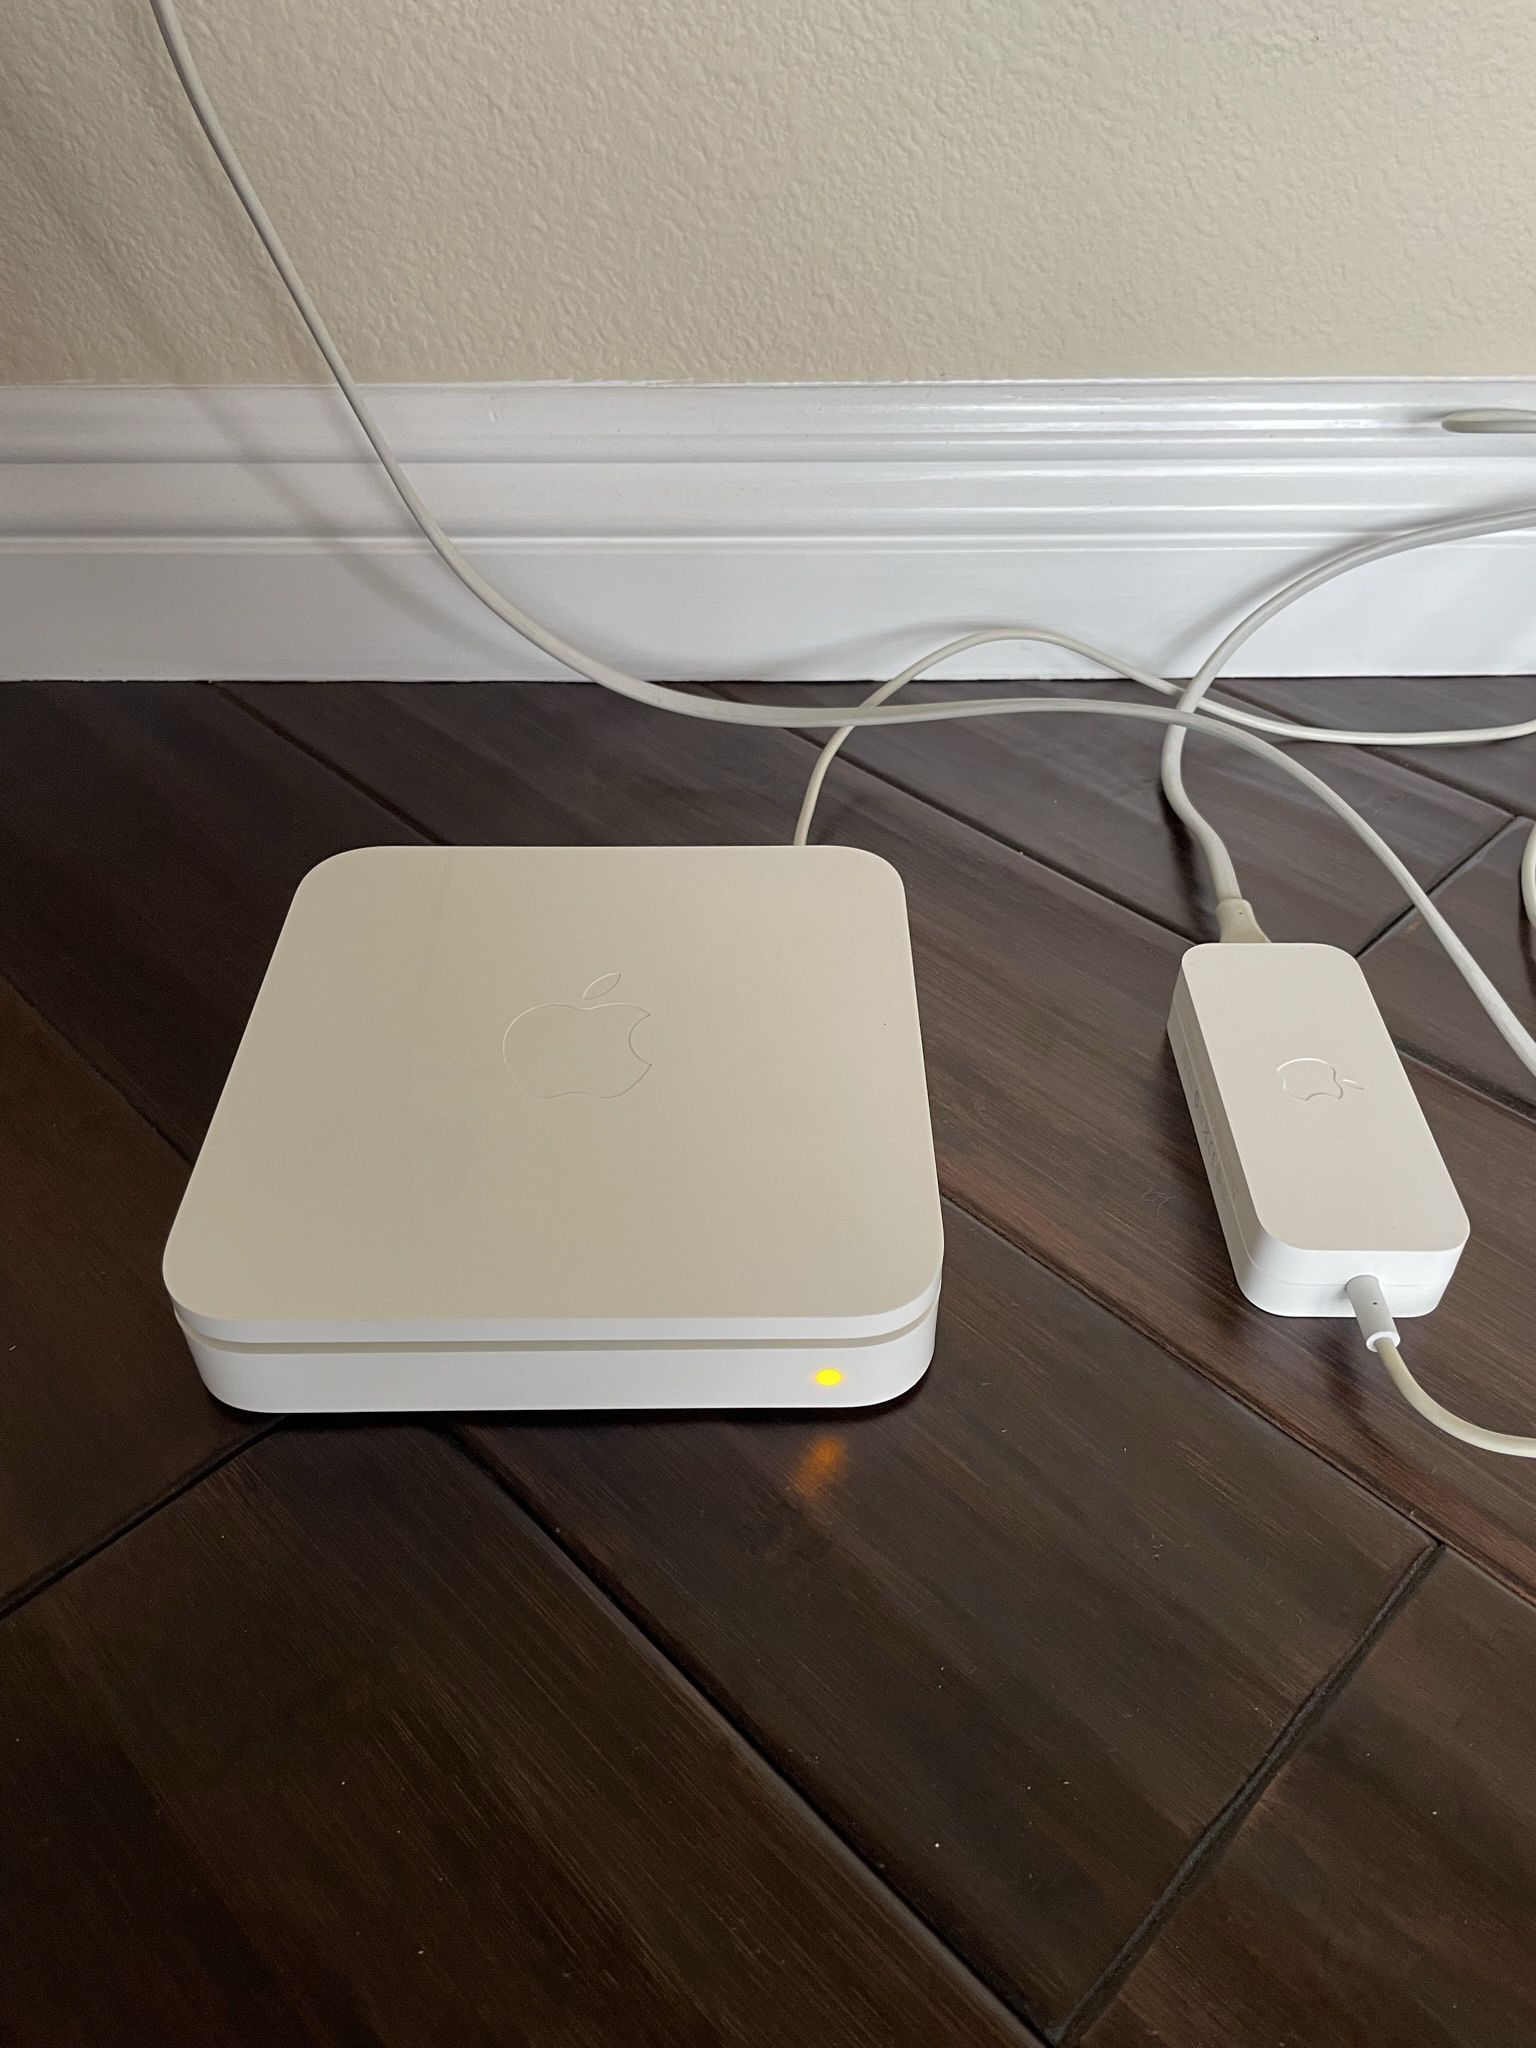 Apple Router / Airport Extreme Base Station